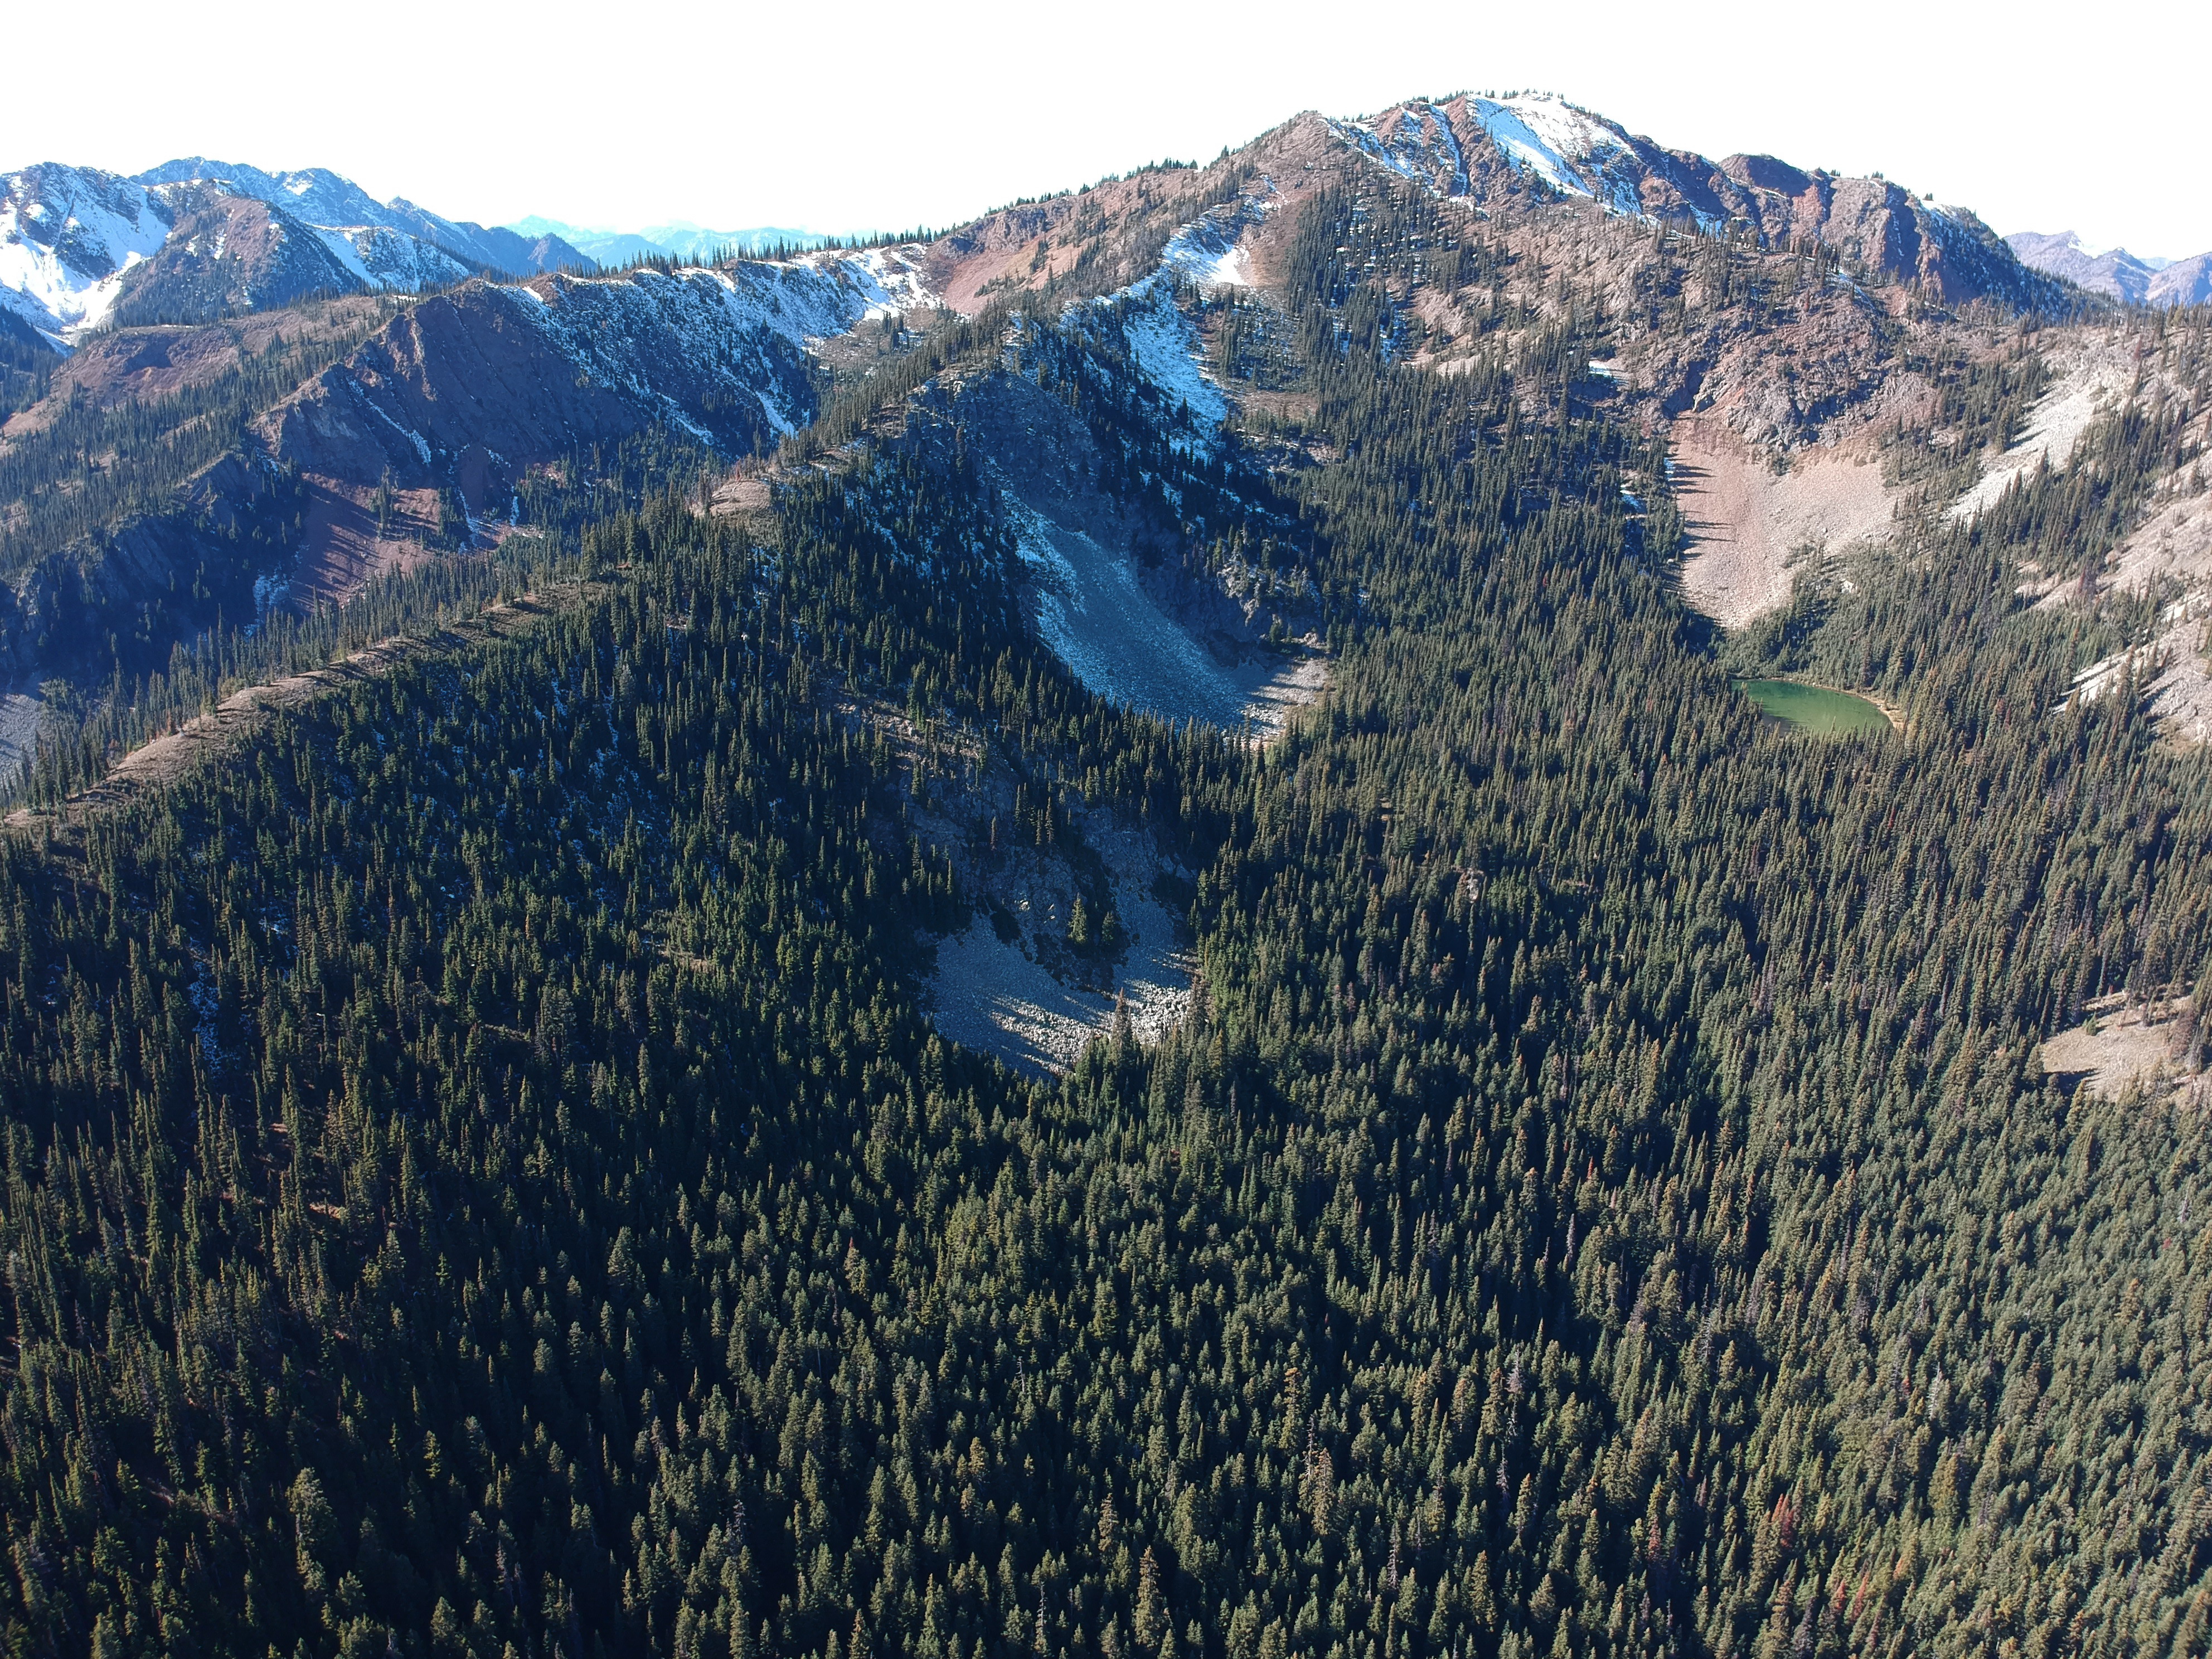  A small lake below Silverdaisy Peak in the "doughnut hole" is seen in this photo provided by the Wilderness Committee.